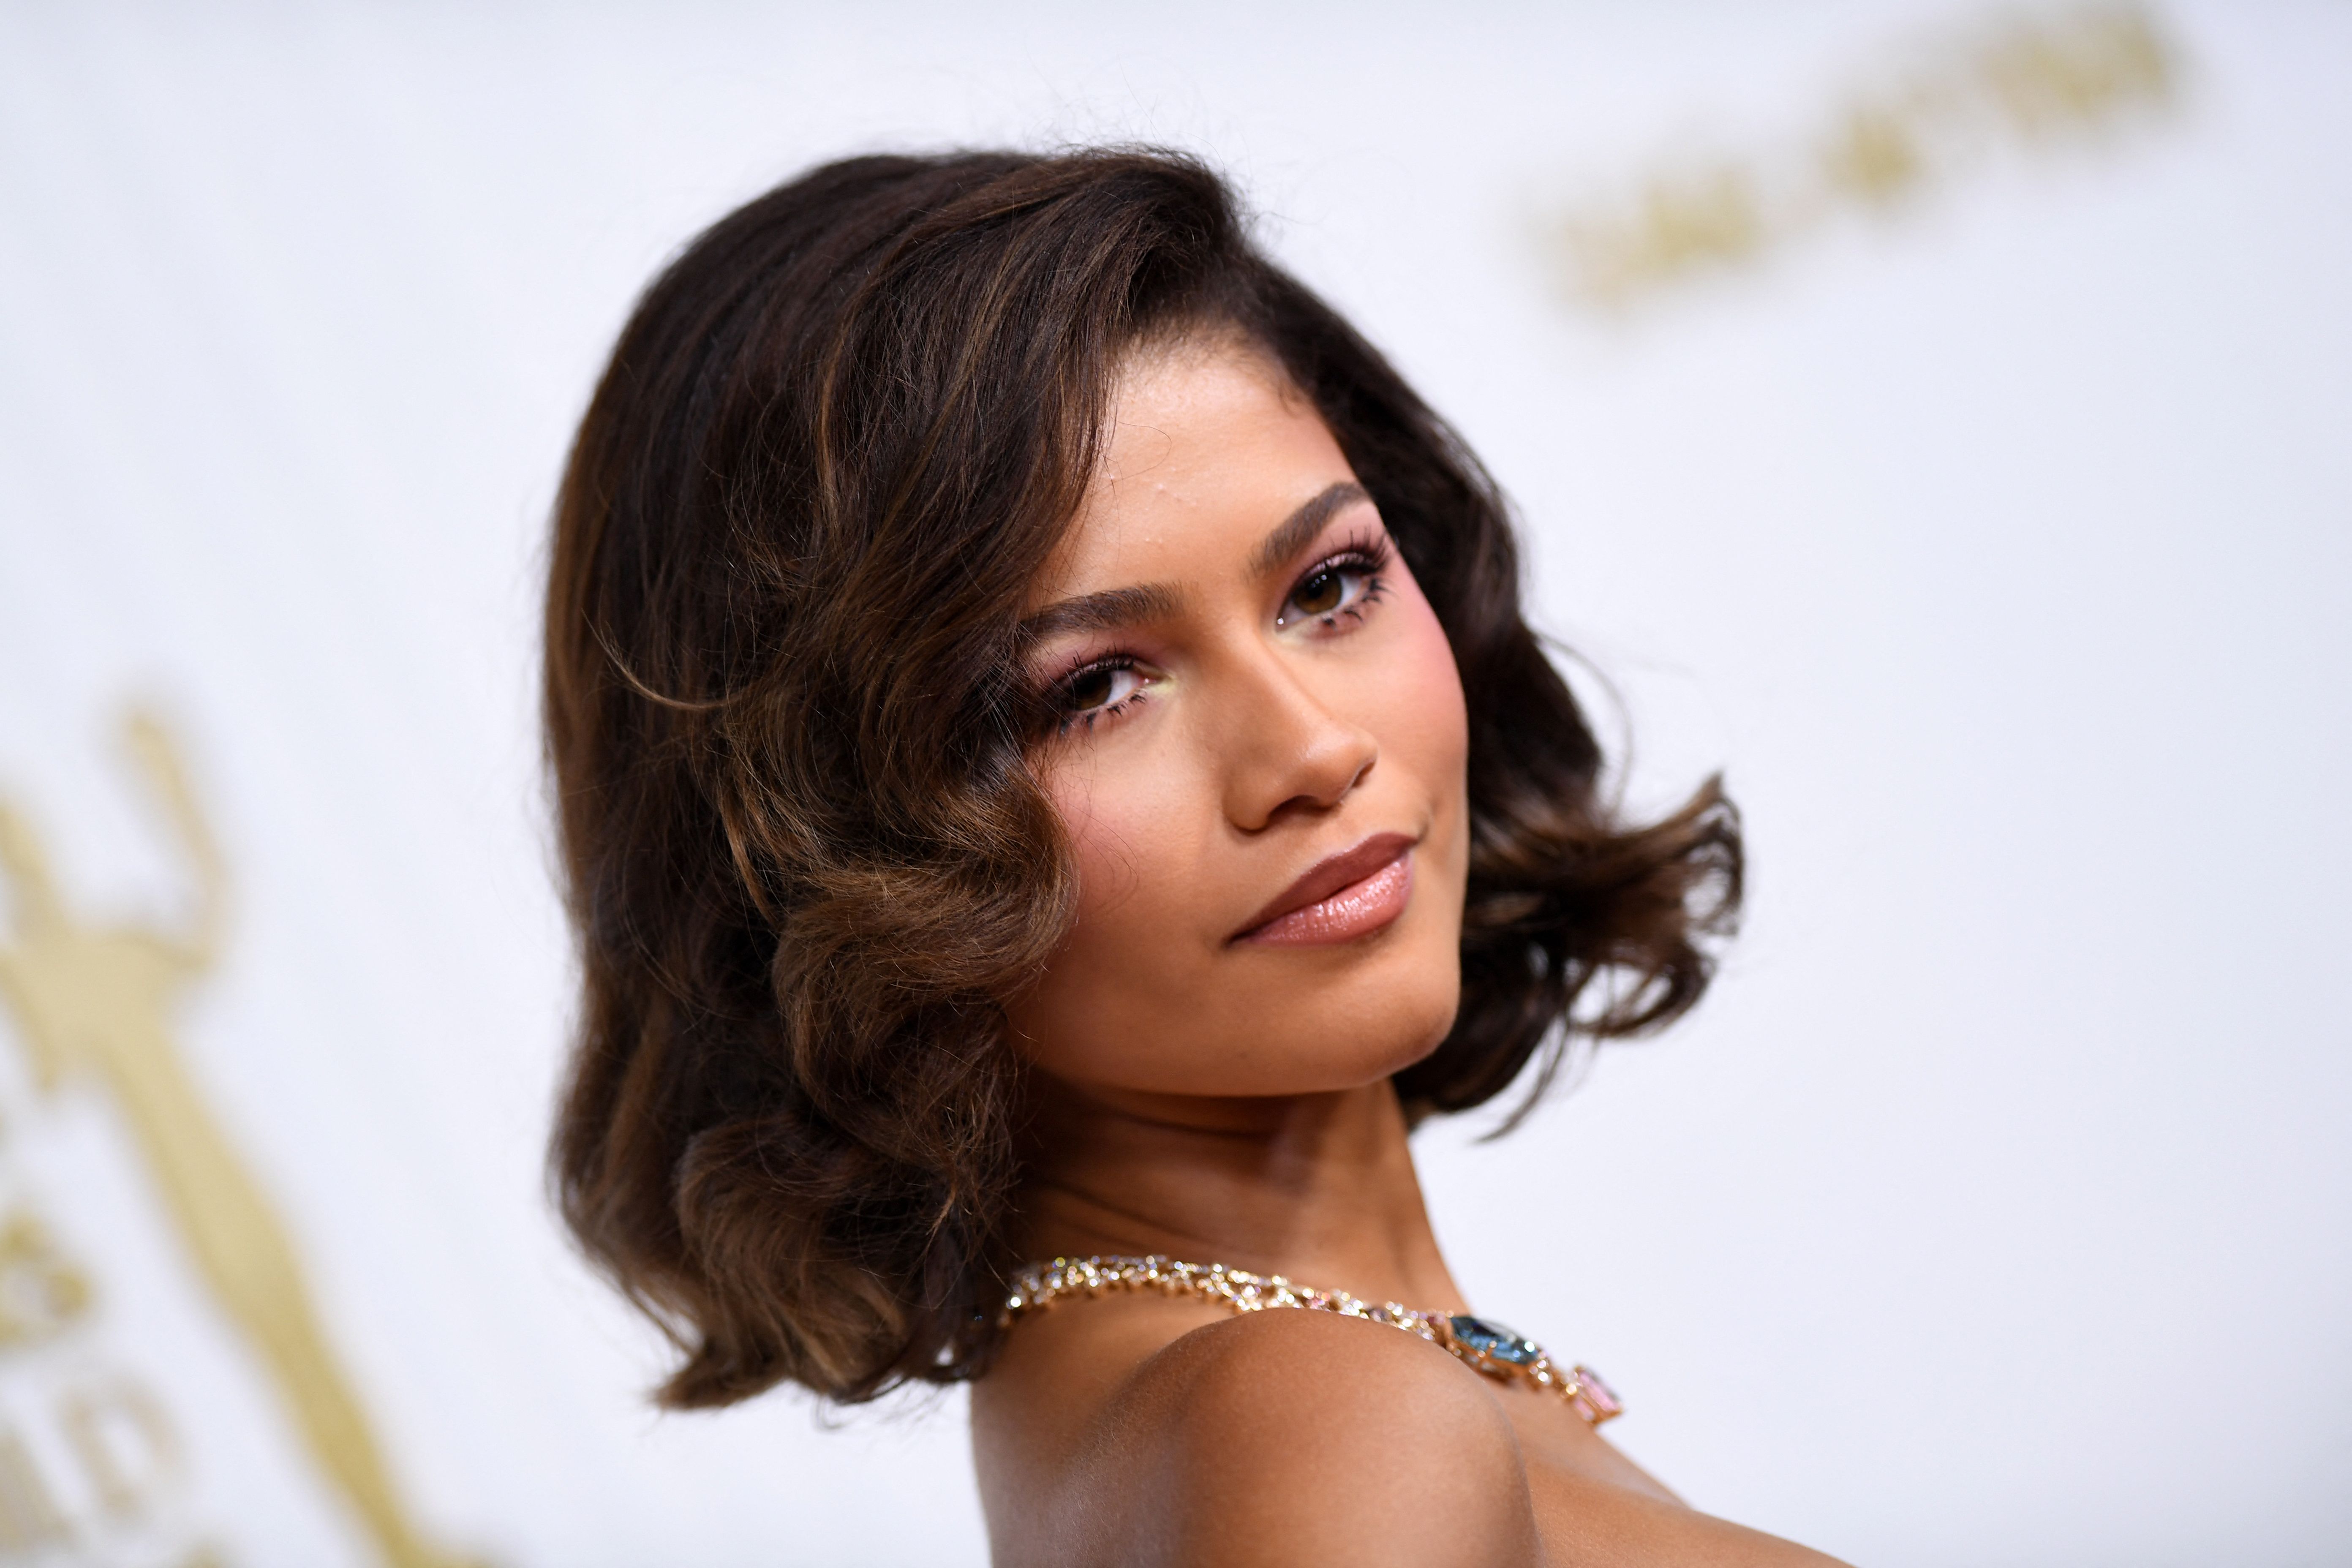 15 of our favorite photos from the SAG Awards red carpet, from Zendaya to Austin Butler